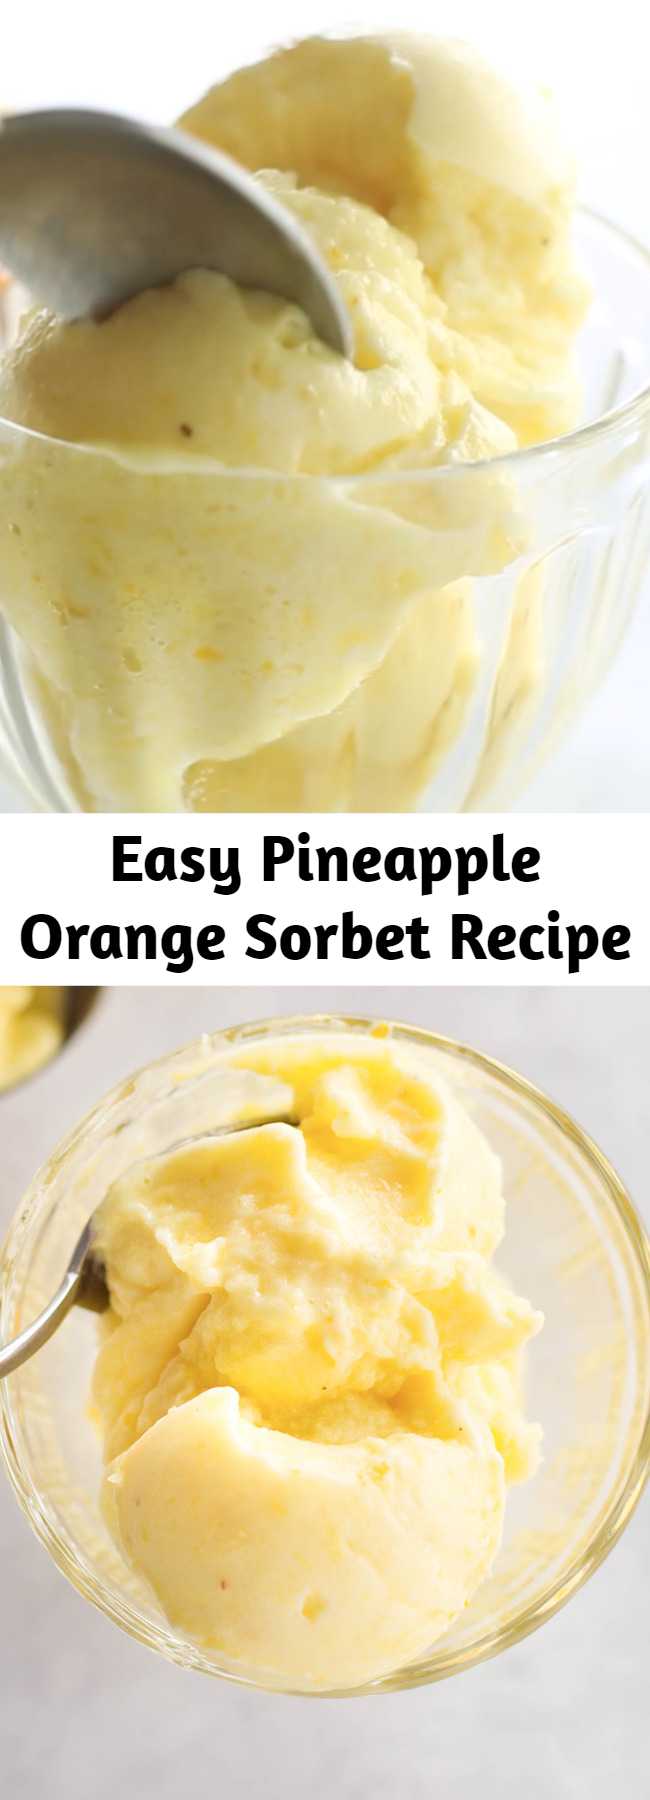 Easy Pineapple Orange Sorbet Recipe - Sorbet is sweeter when you make it with two fruits instead of just one.